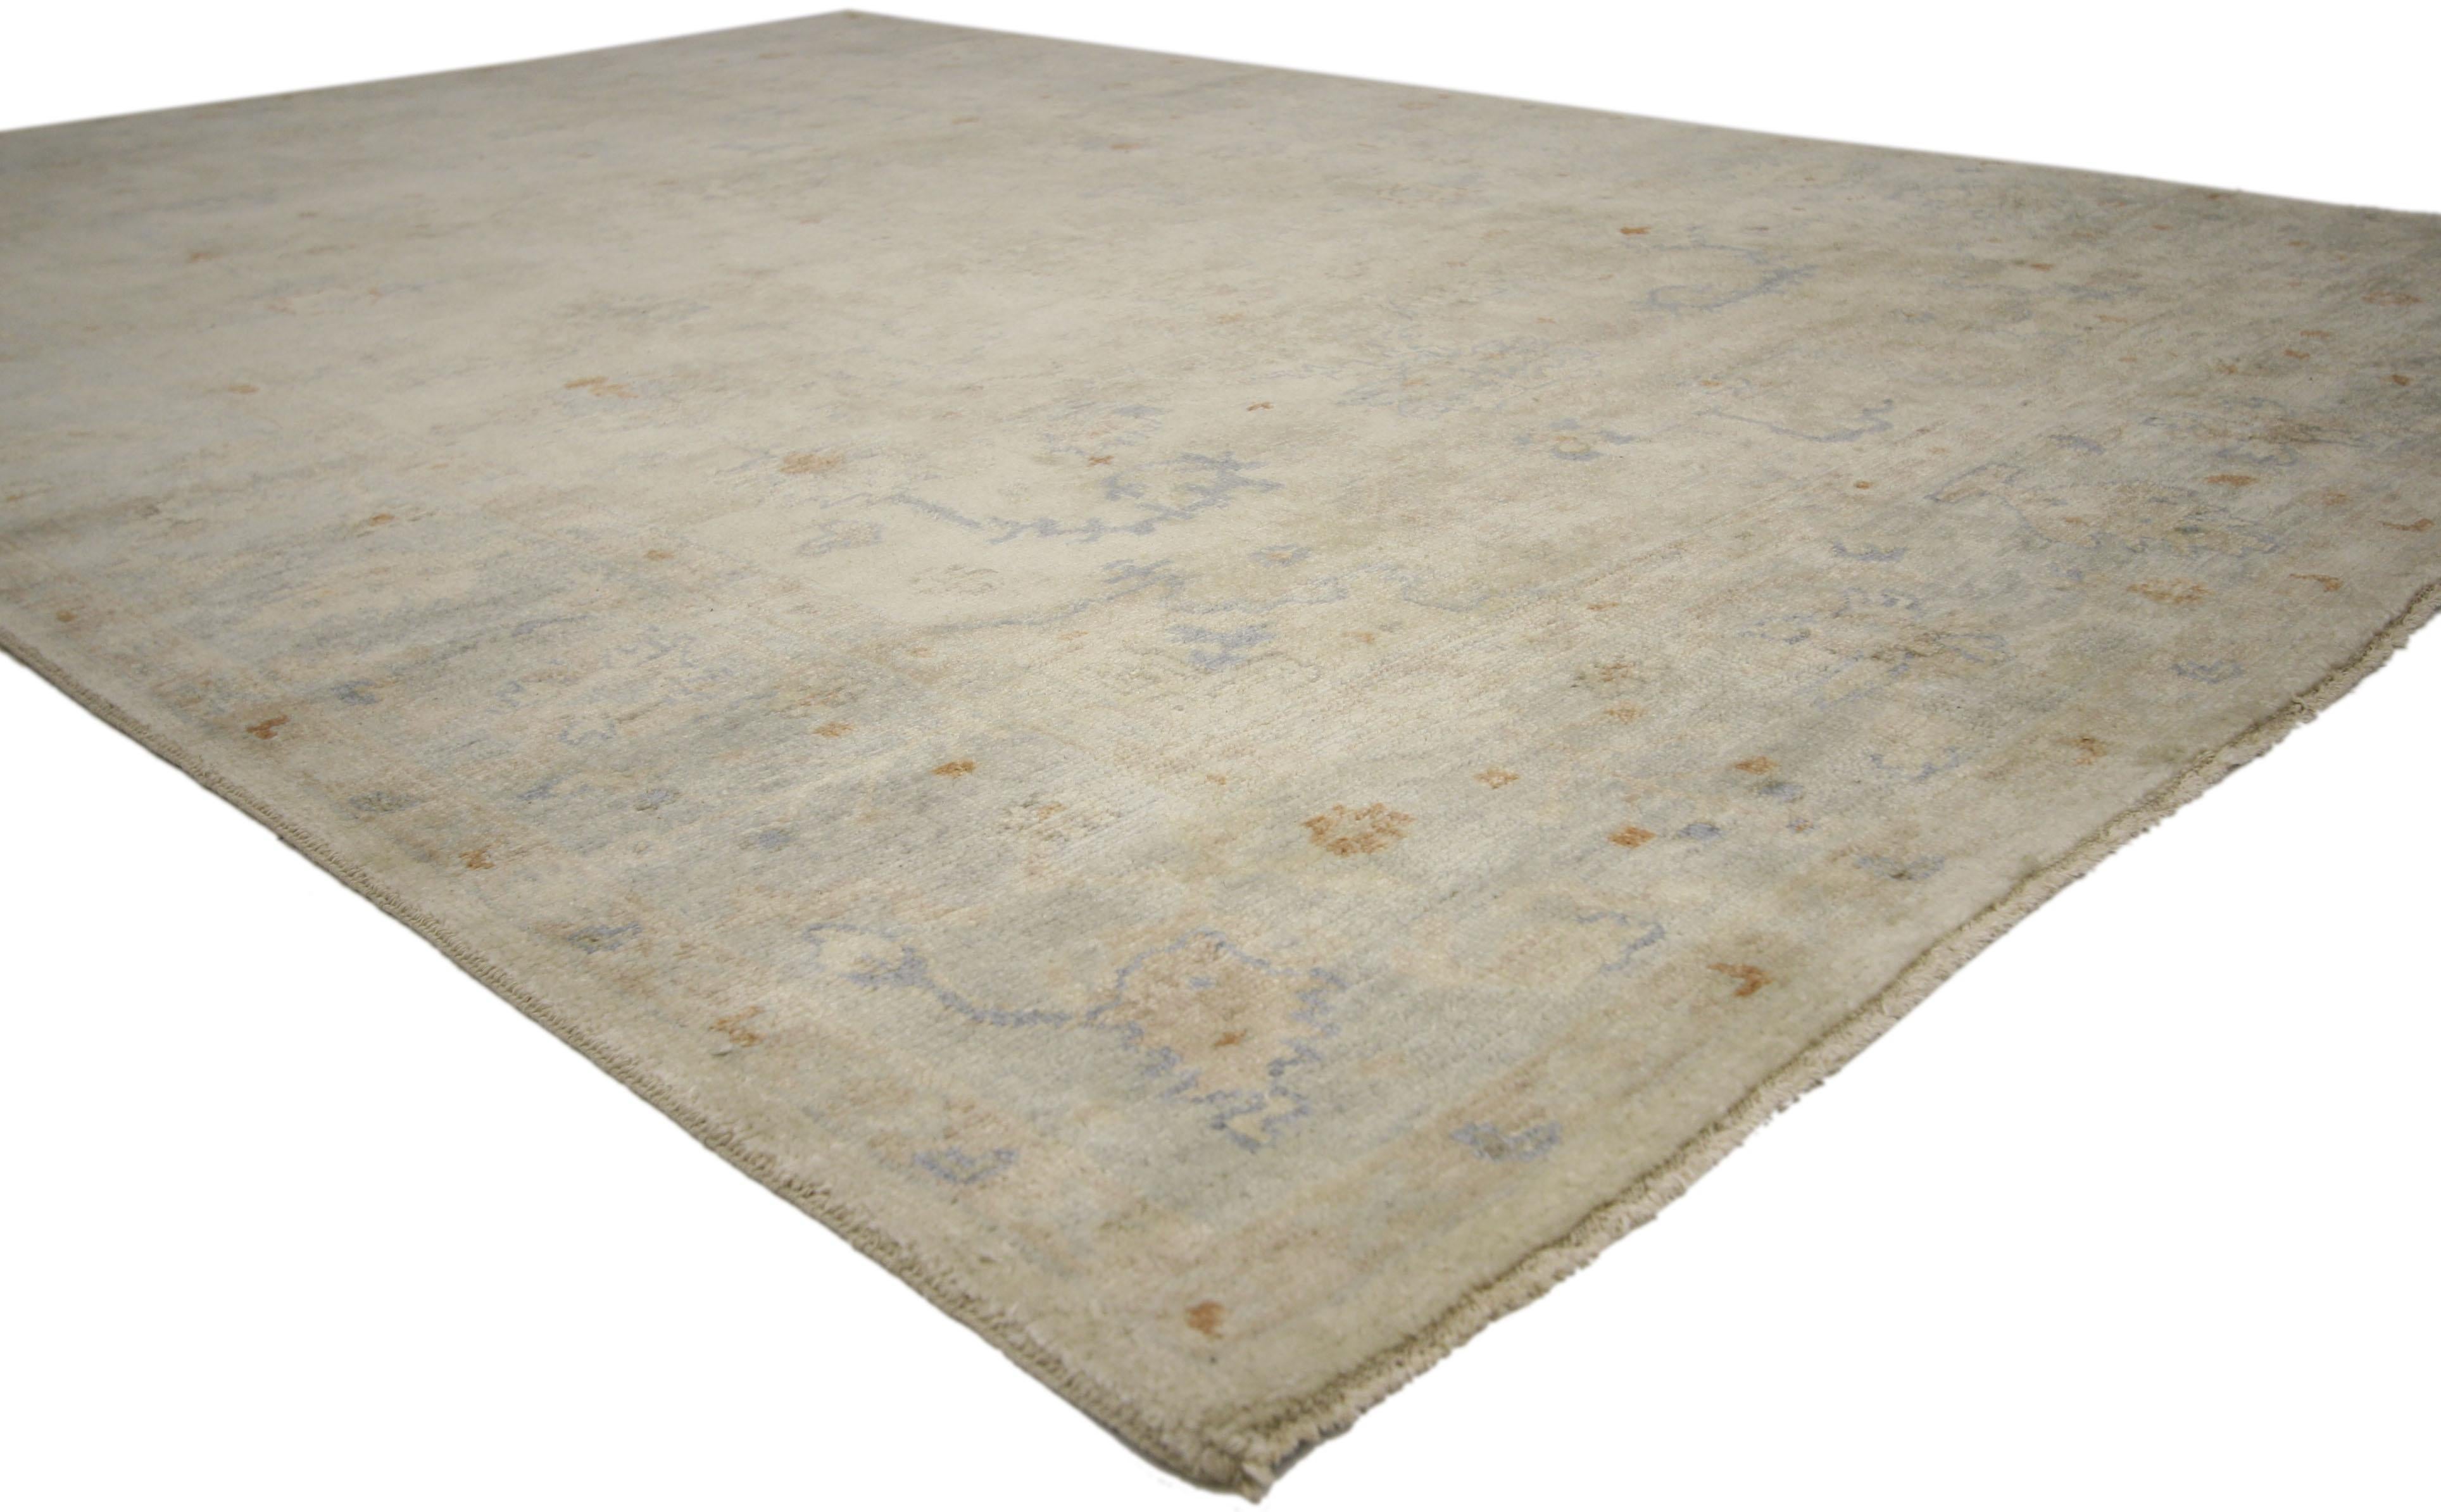 30139, new contemporary transitional Oushak style rug with cool-tone neutral colors. This hand knotted wool contemporary Oushak style rug features an elegant all-over floral pattern spread across an abrashed sandy gray field. A stylized latticework